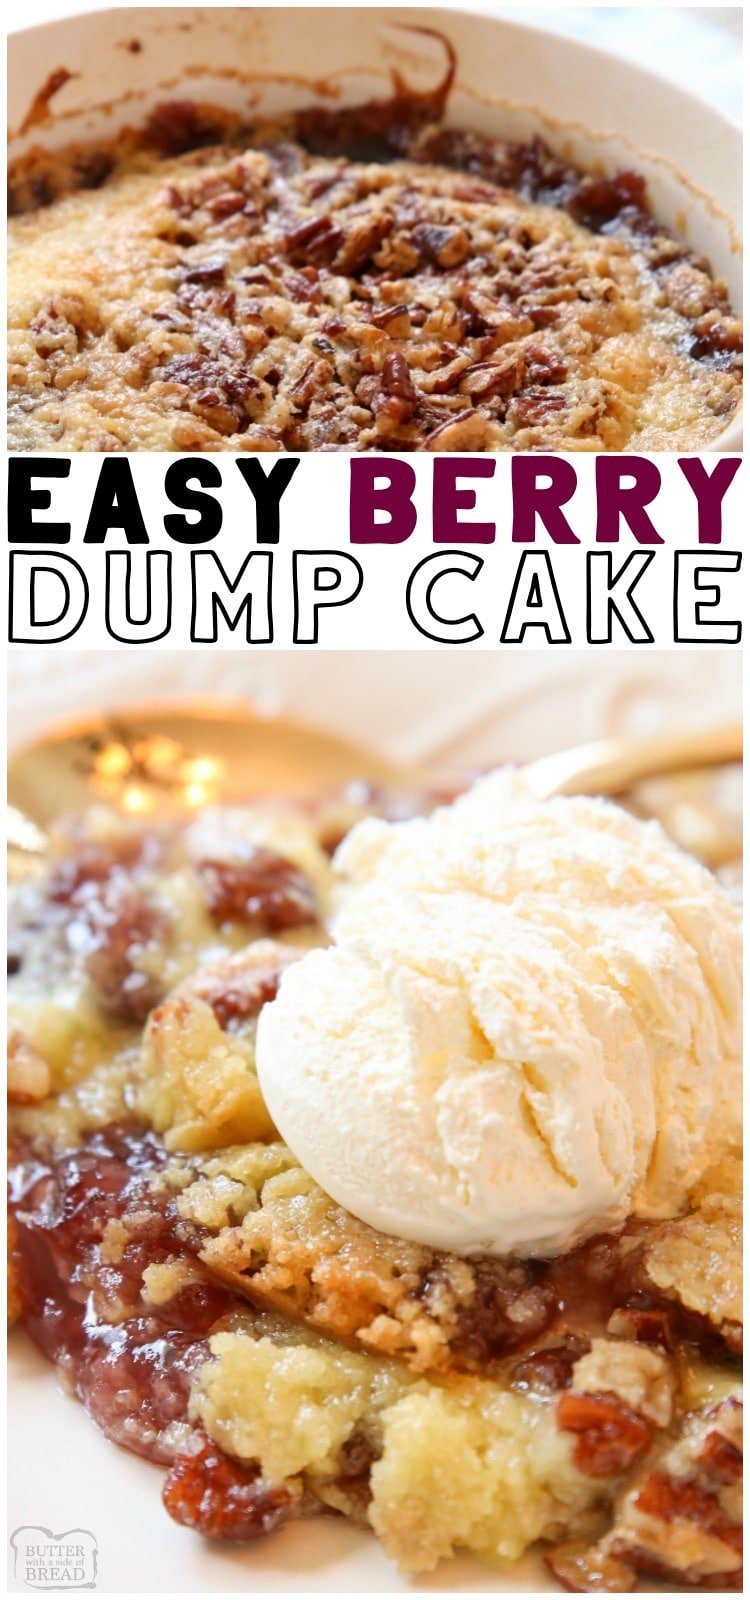 Berry Dump Cake recipe made with just 4 ingredients and ready to serve in 30 minutes! Easy dump cake made with raspberries, blueberries and strawberries. This Berry Cake is perfect served with vanilla ice cream.